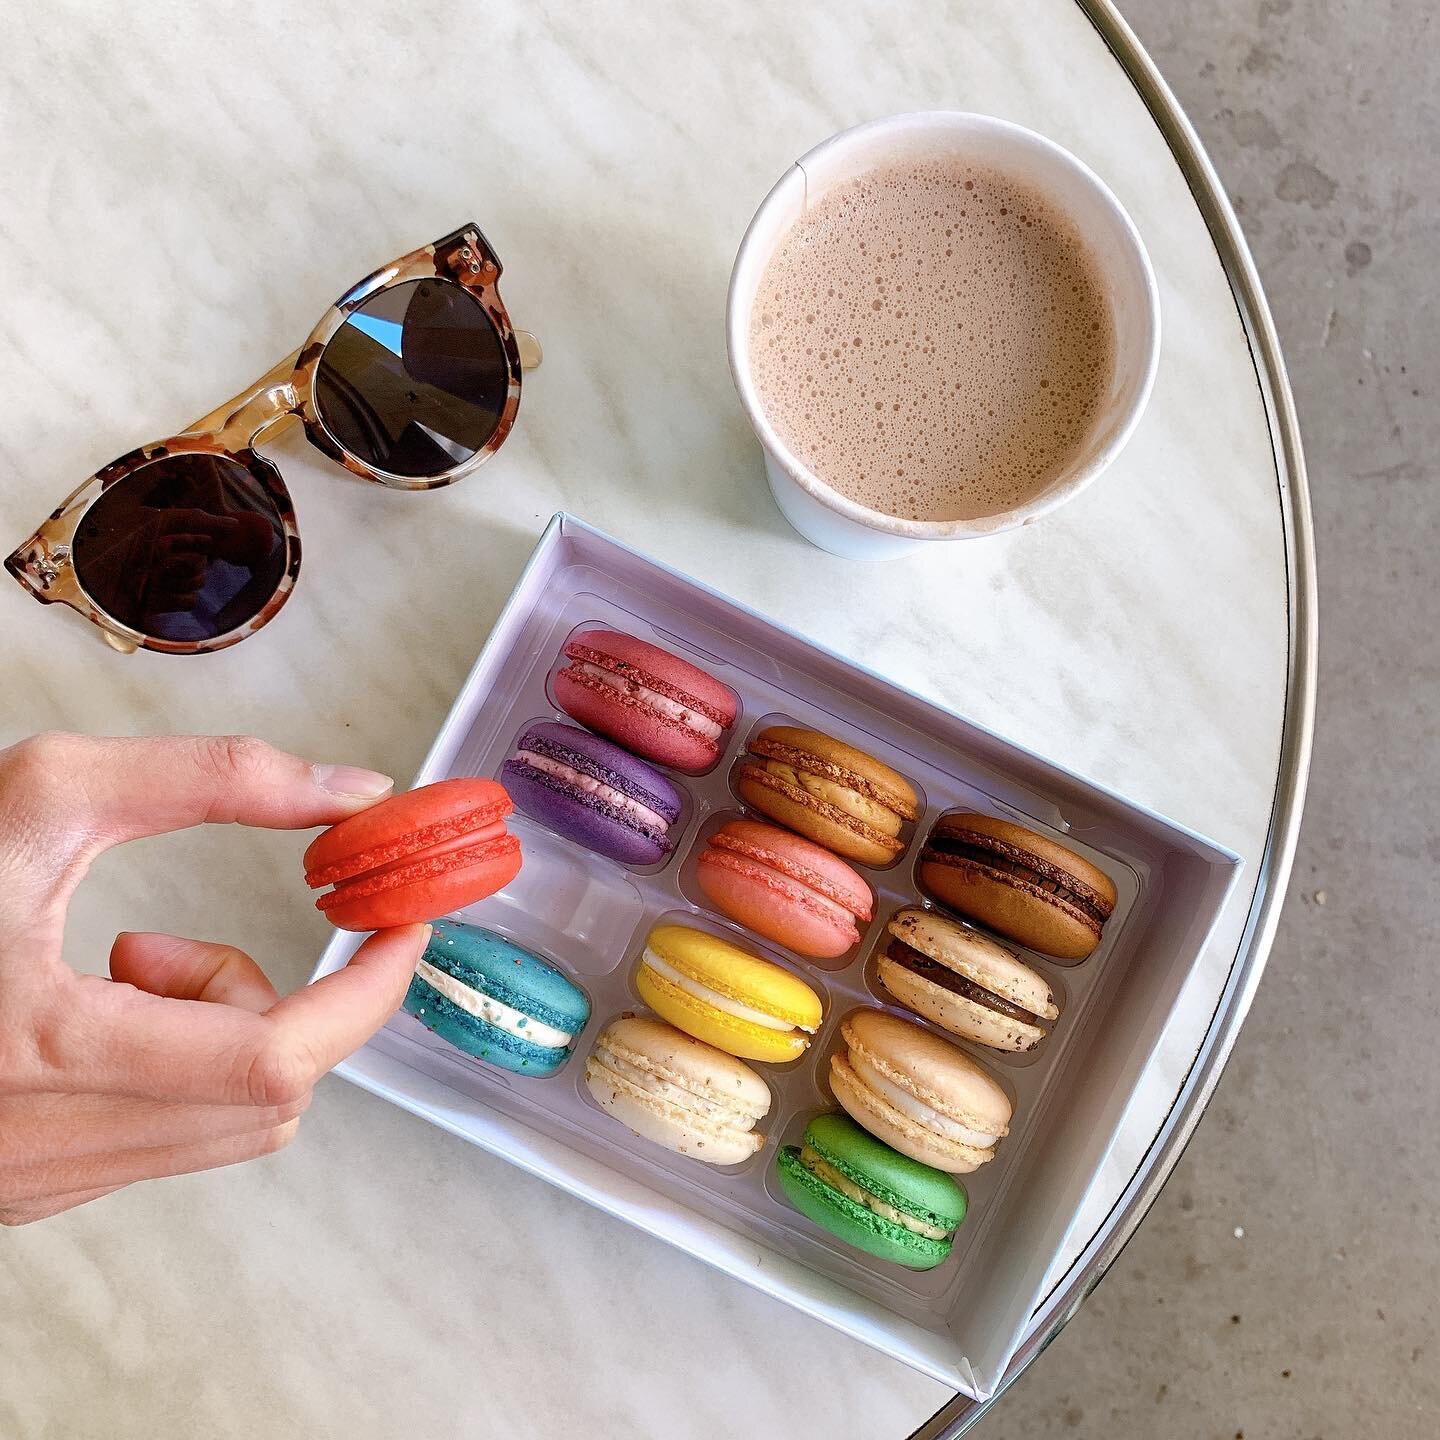 Upgrade your coffee break with a box of colorful delicious macarons ! 
Happy Tuesday ! 🤩

#ChellesMacarons #macaron #frenchmacarons #bakery #baking #foodie #sweettooth #cookies #dallasfoodie #instafood #instagood #dessert #macaronlove #patisserie #m